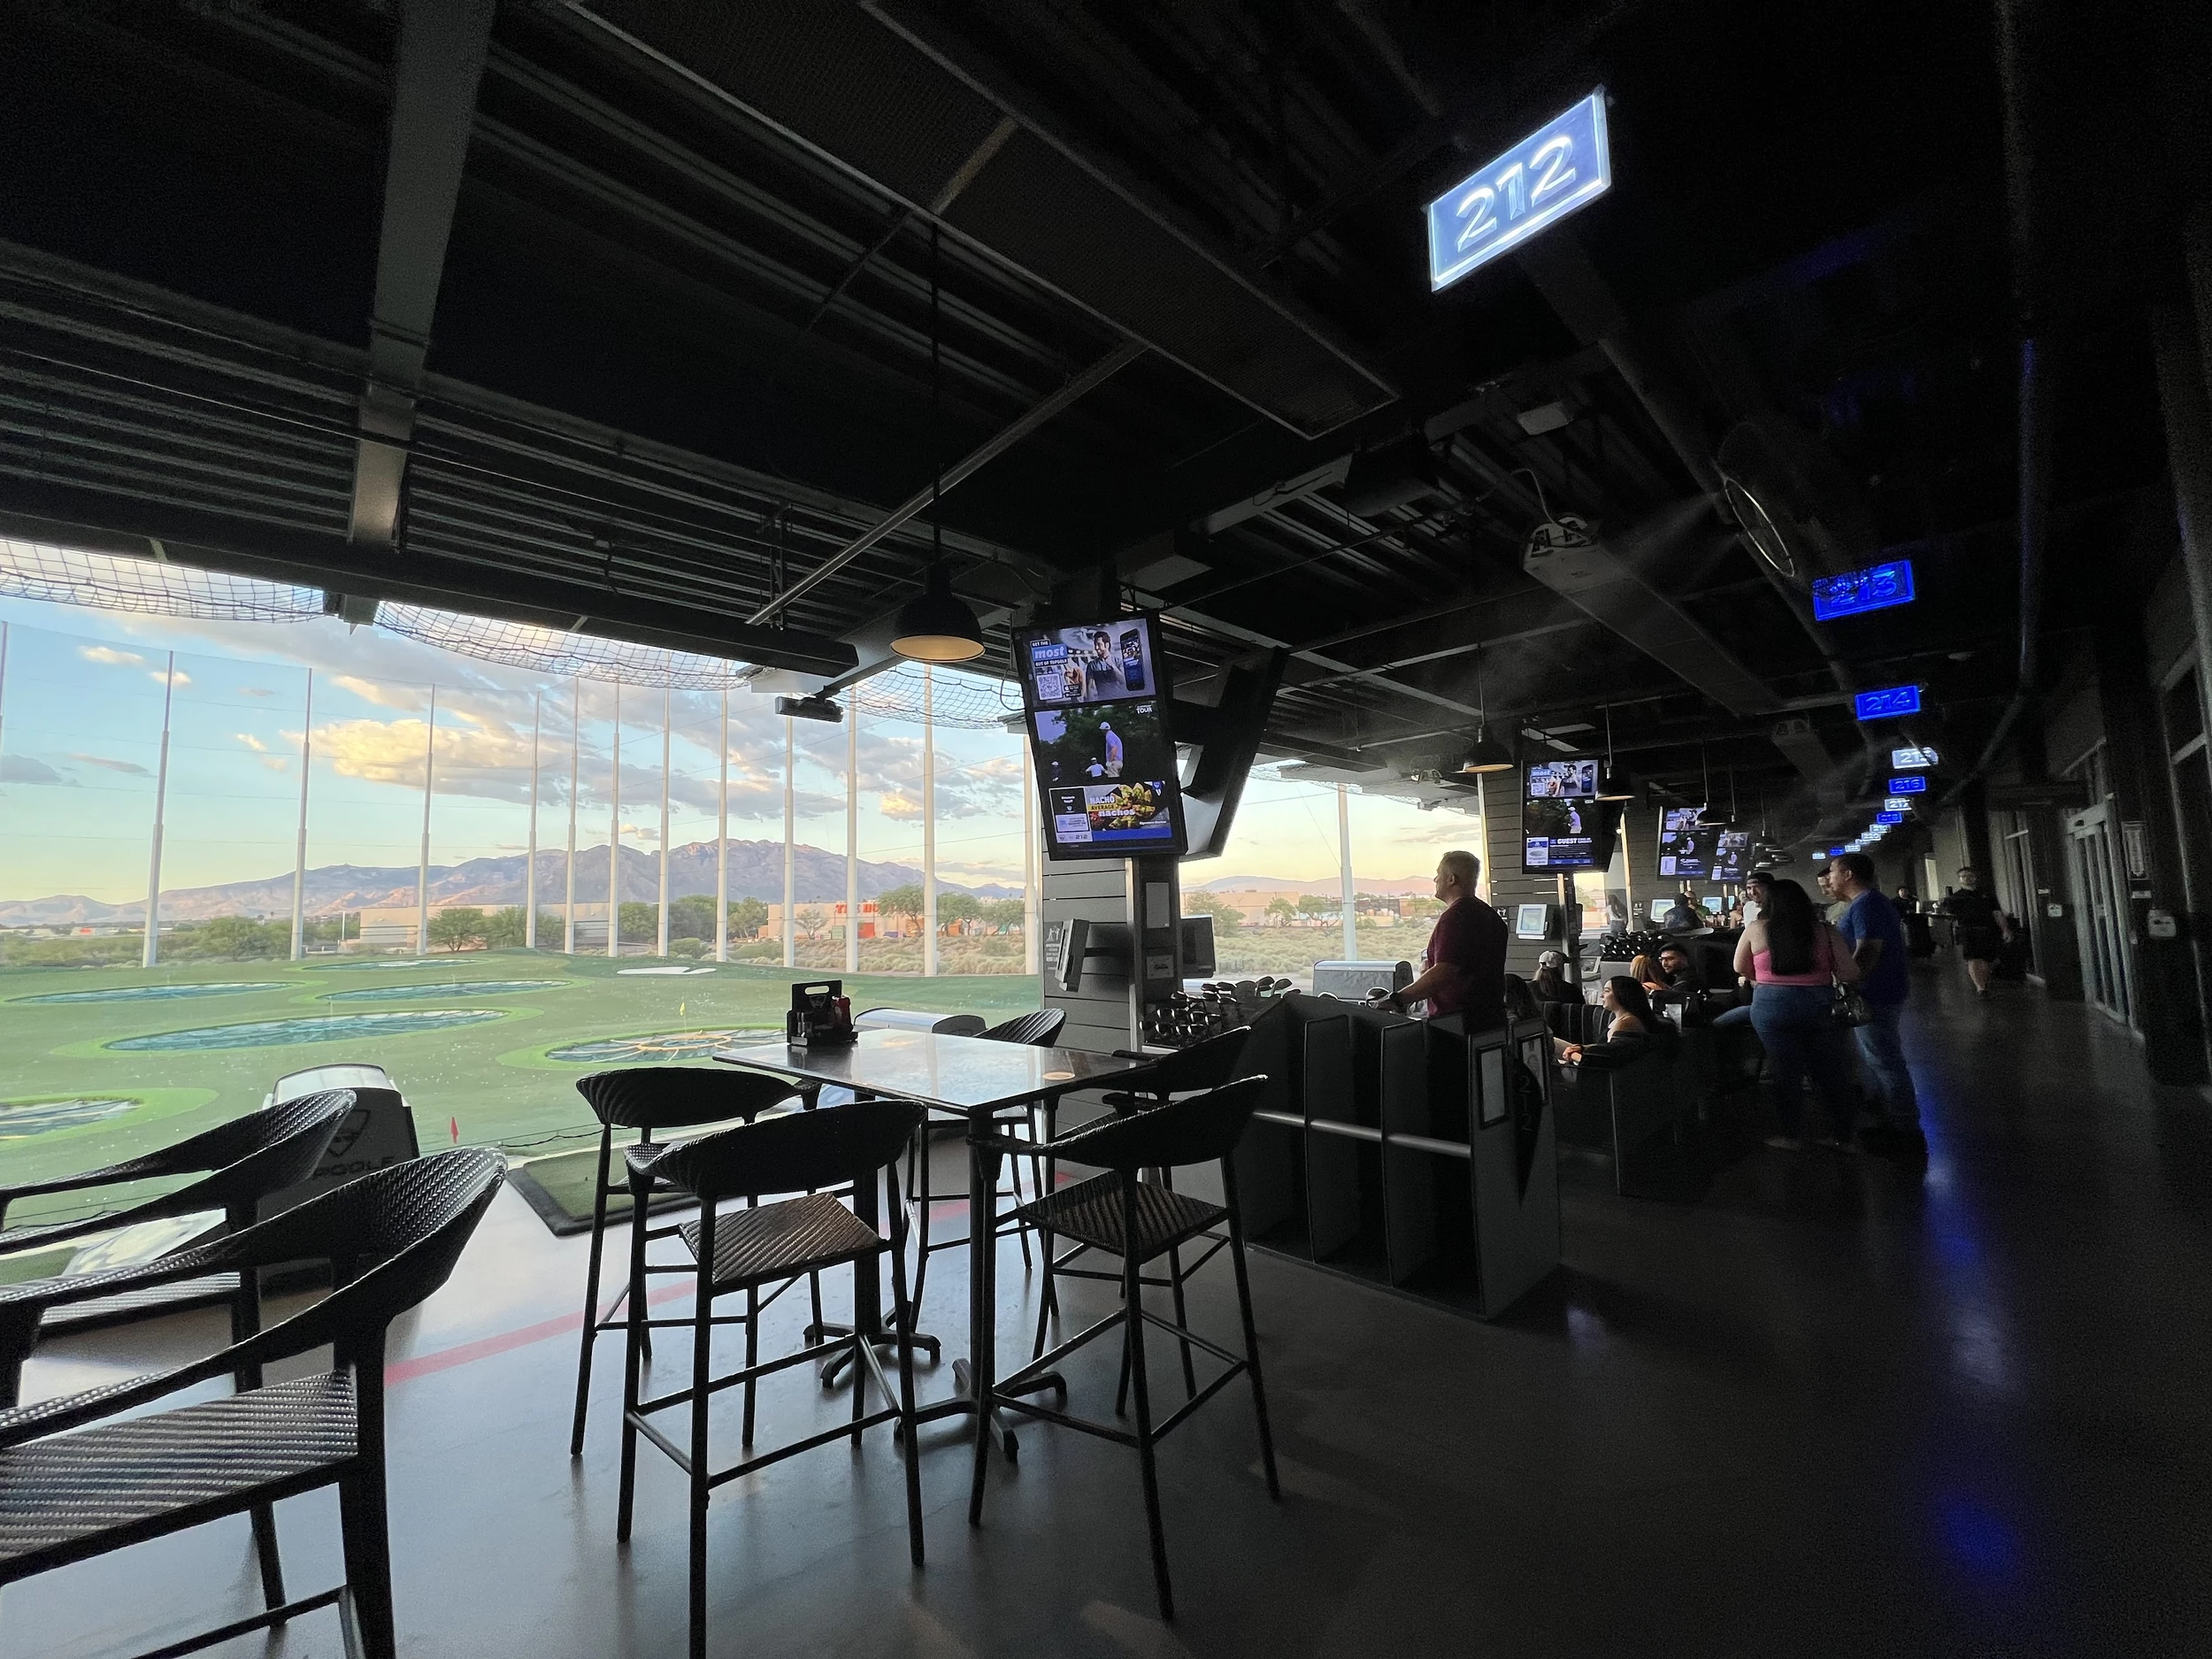 When is Topgolf coming to Idaho?